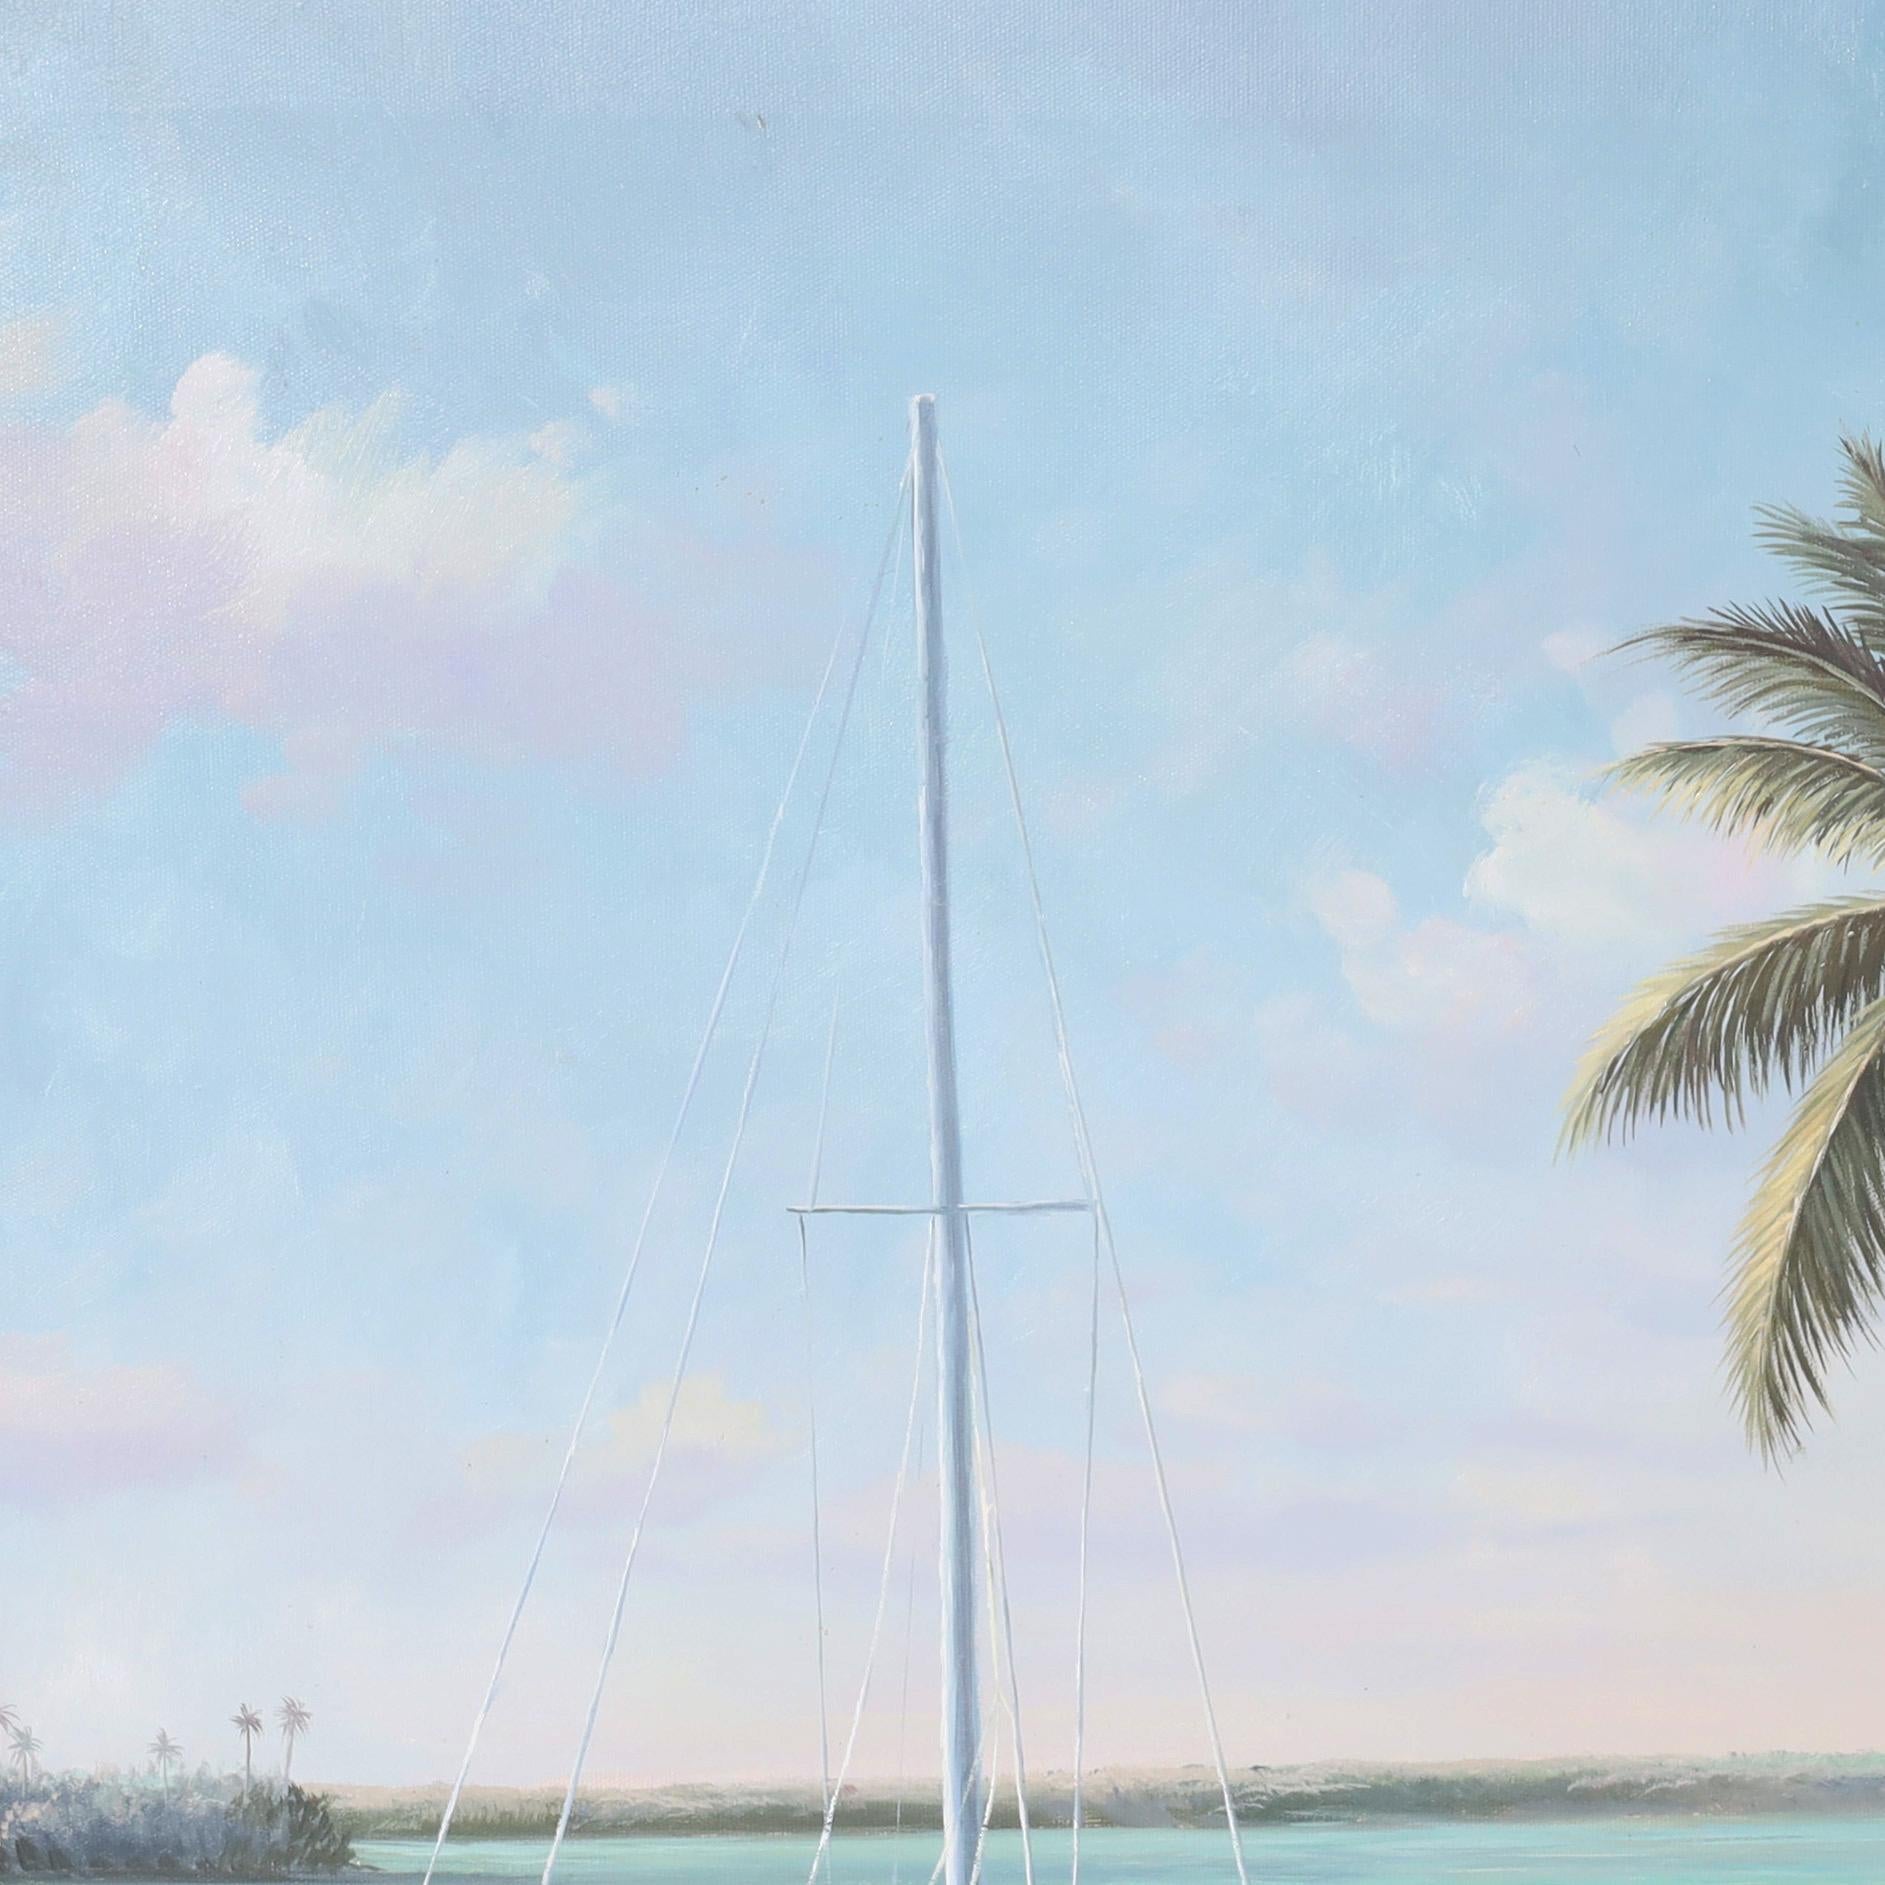 Transporting oil painting on canvas of a tropical Caribbean bayscape with a boat, houses and palm trees on a sunny day highlighting light and shadow. Signed J. Drooks in the lower right and presented in a wood frame.